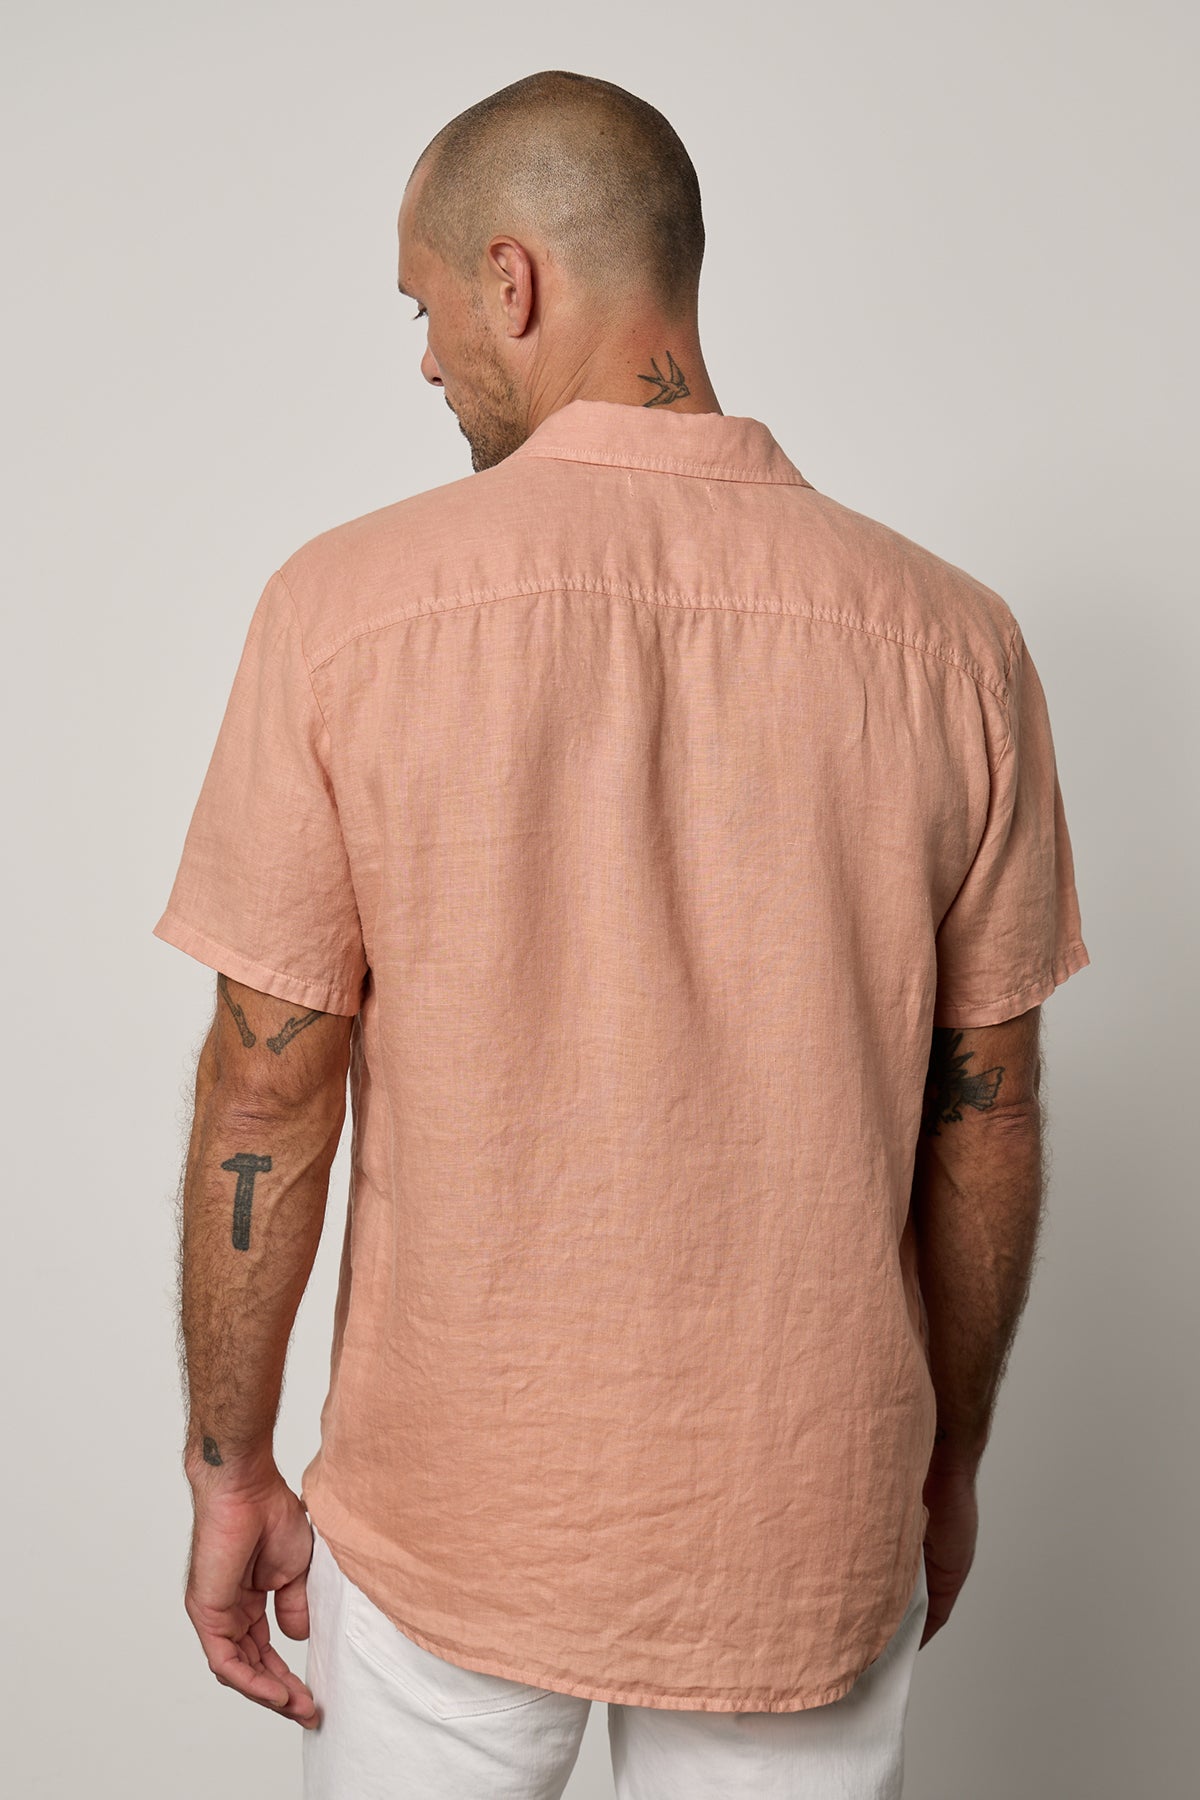 Mackie Button-Up Shirt in bronze with white denim back-26343177650369